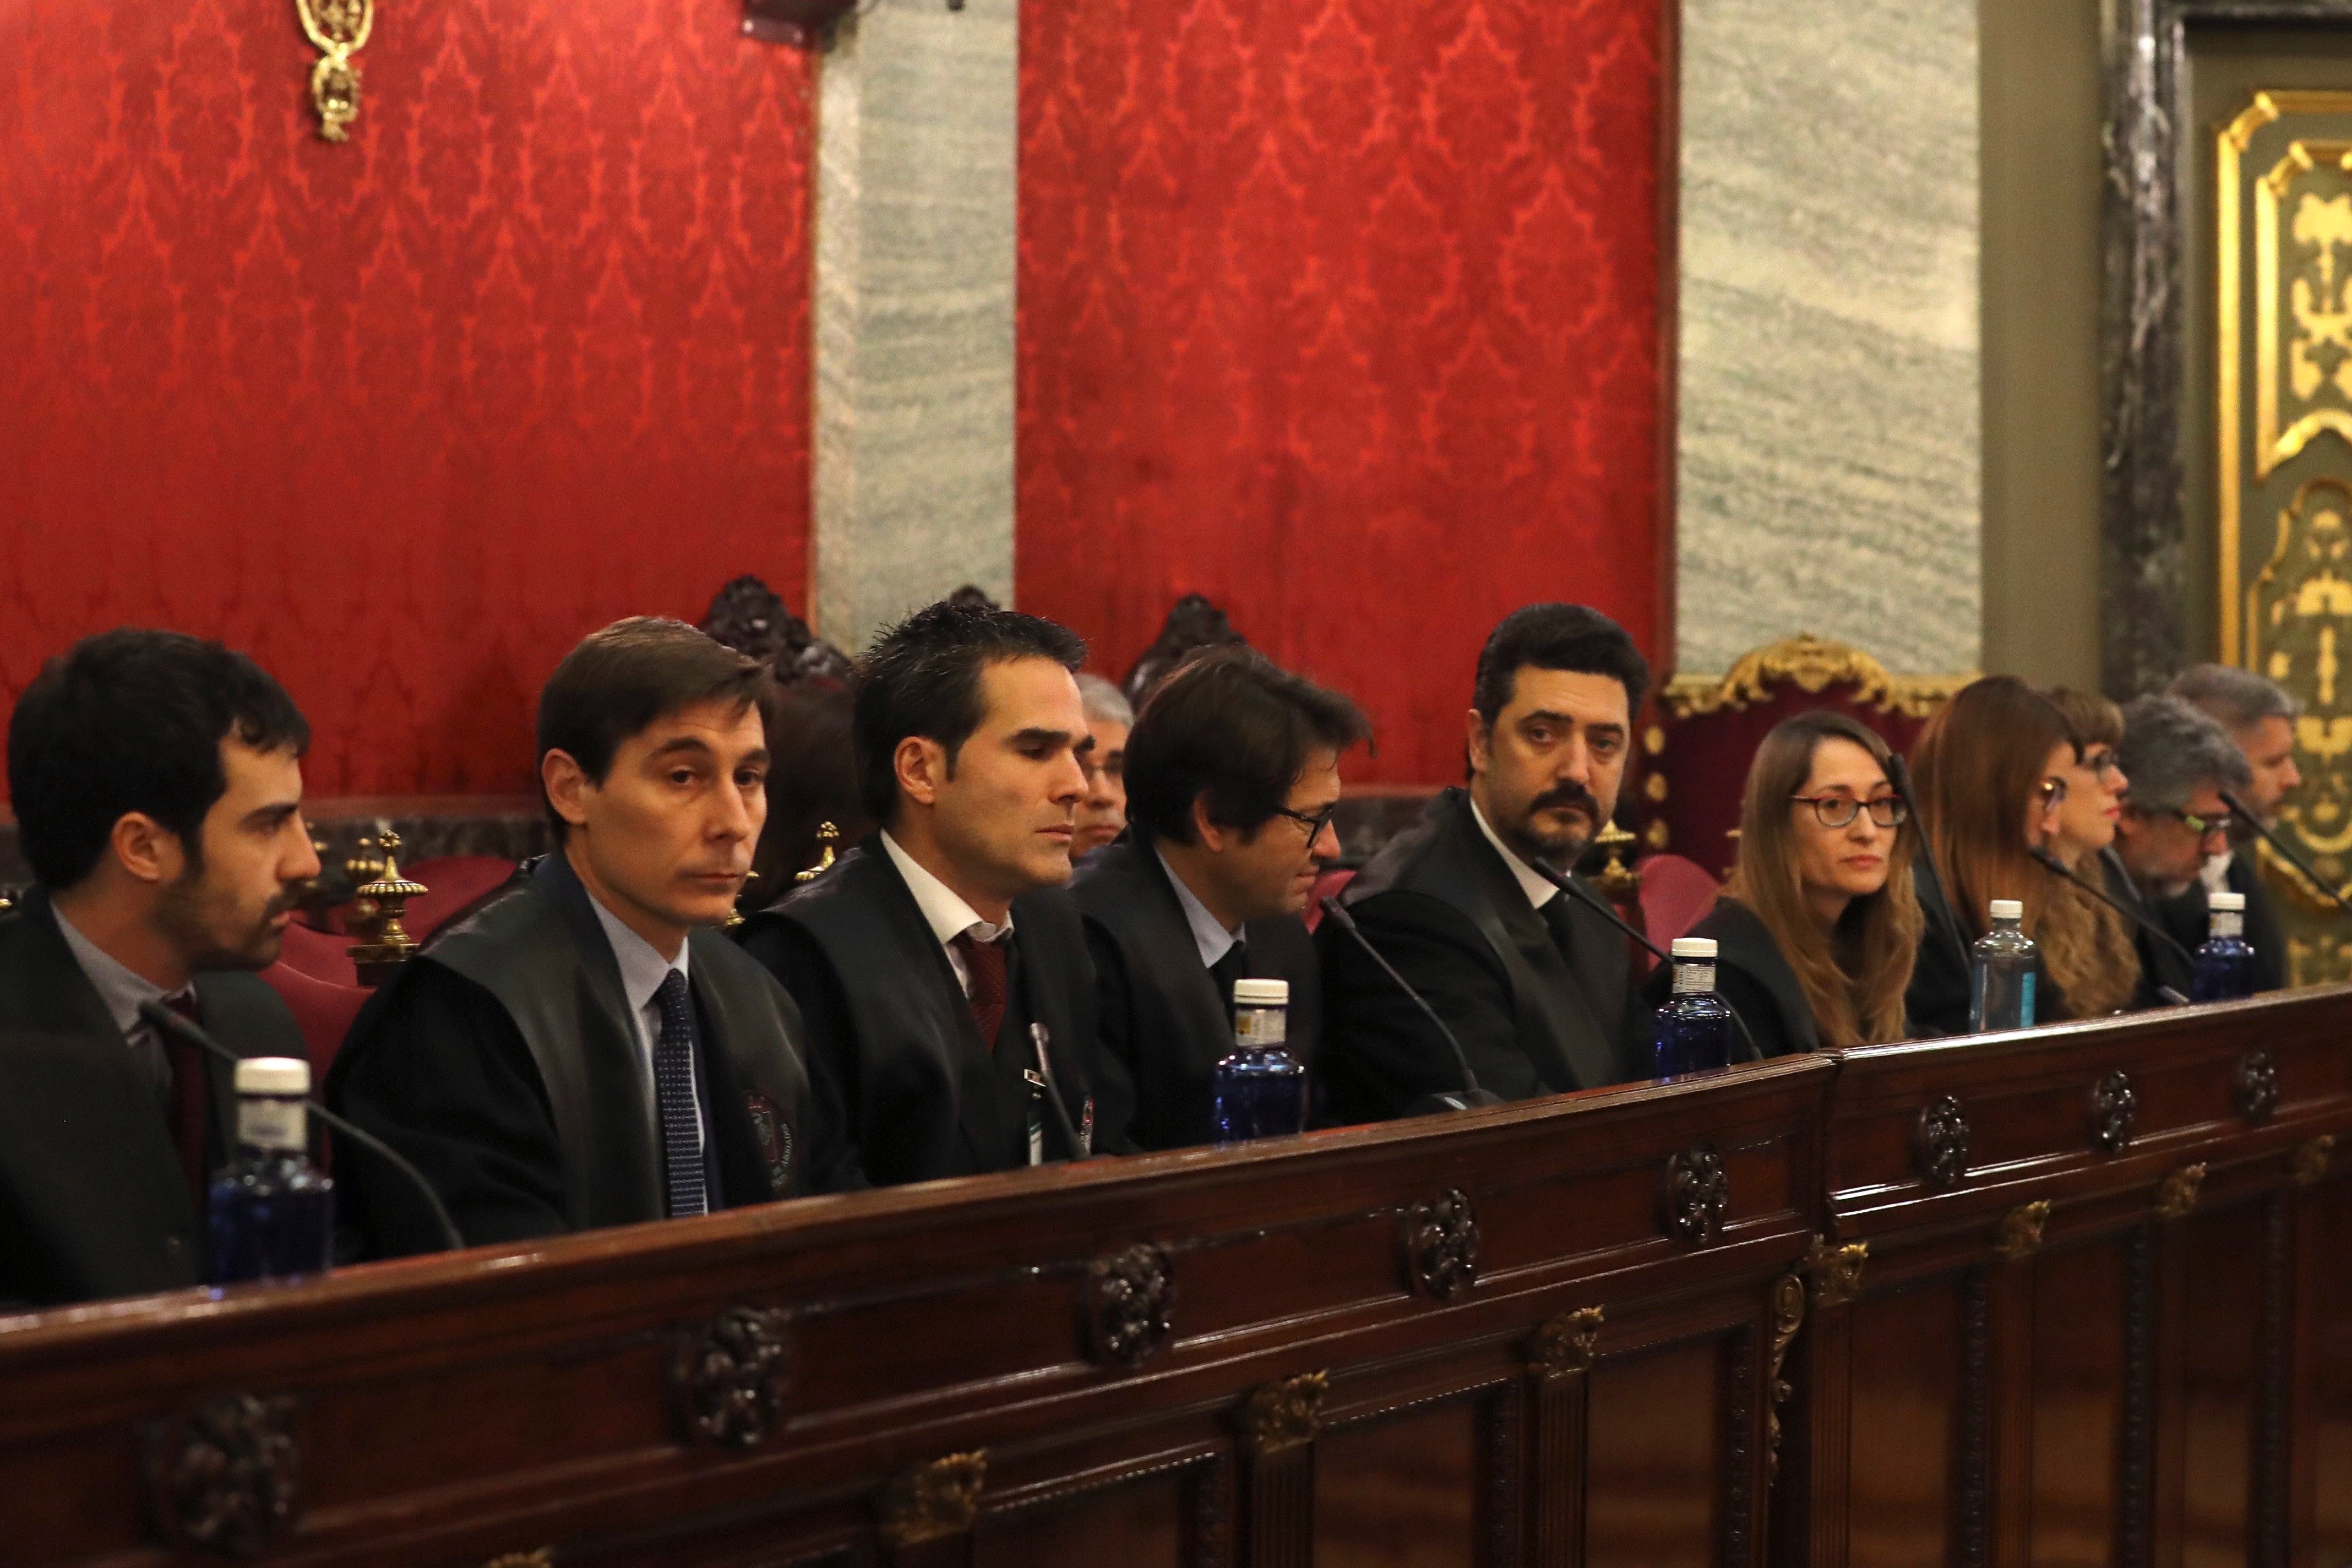 "The independence movement is on trial" say Catalan defence lawyers